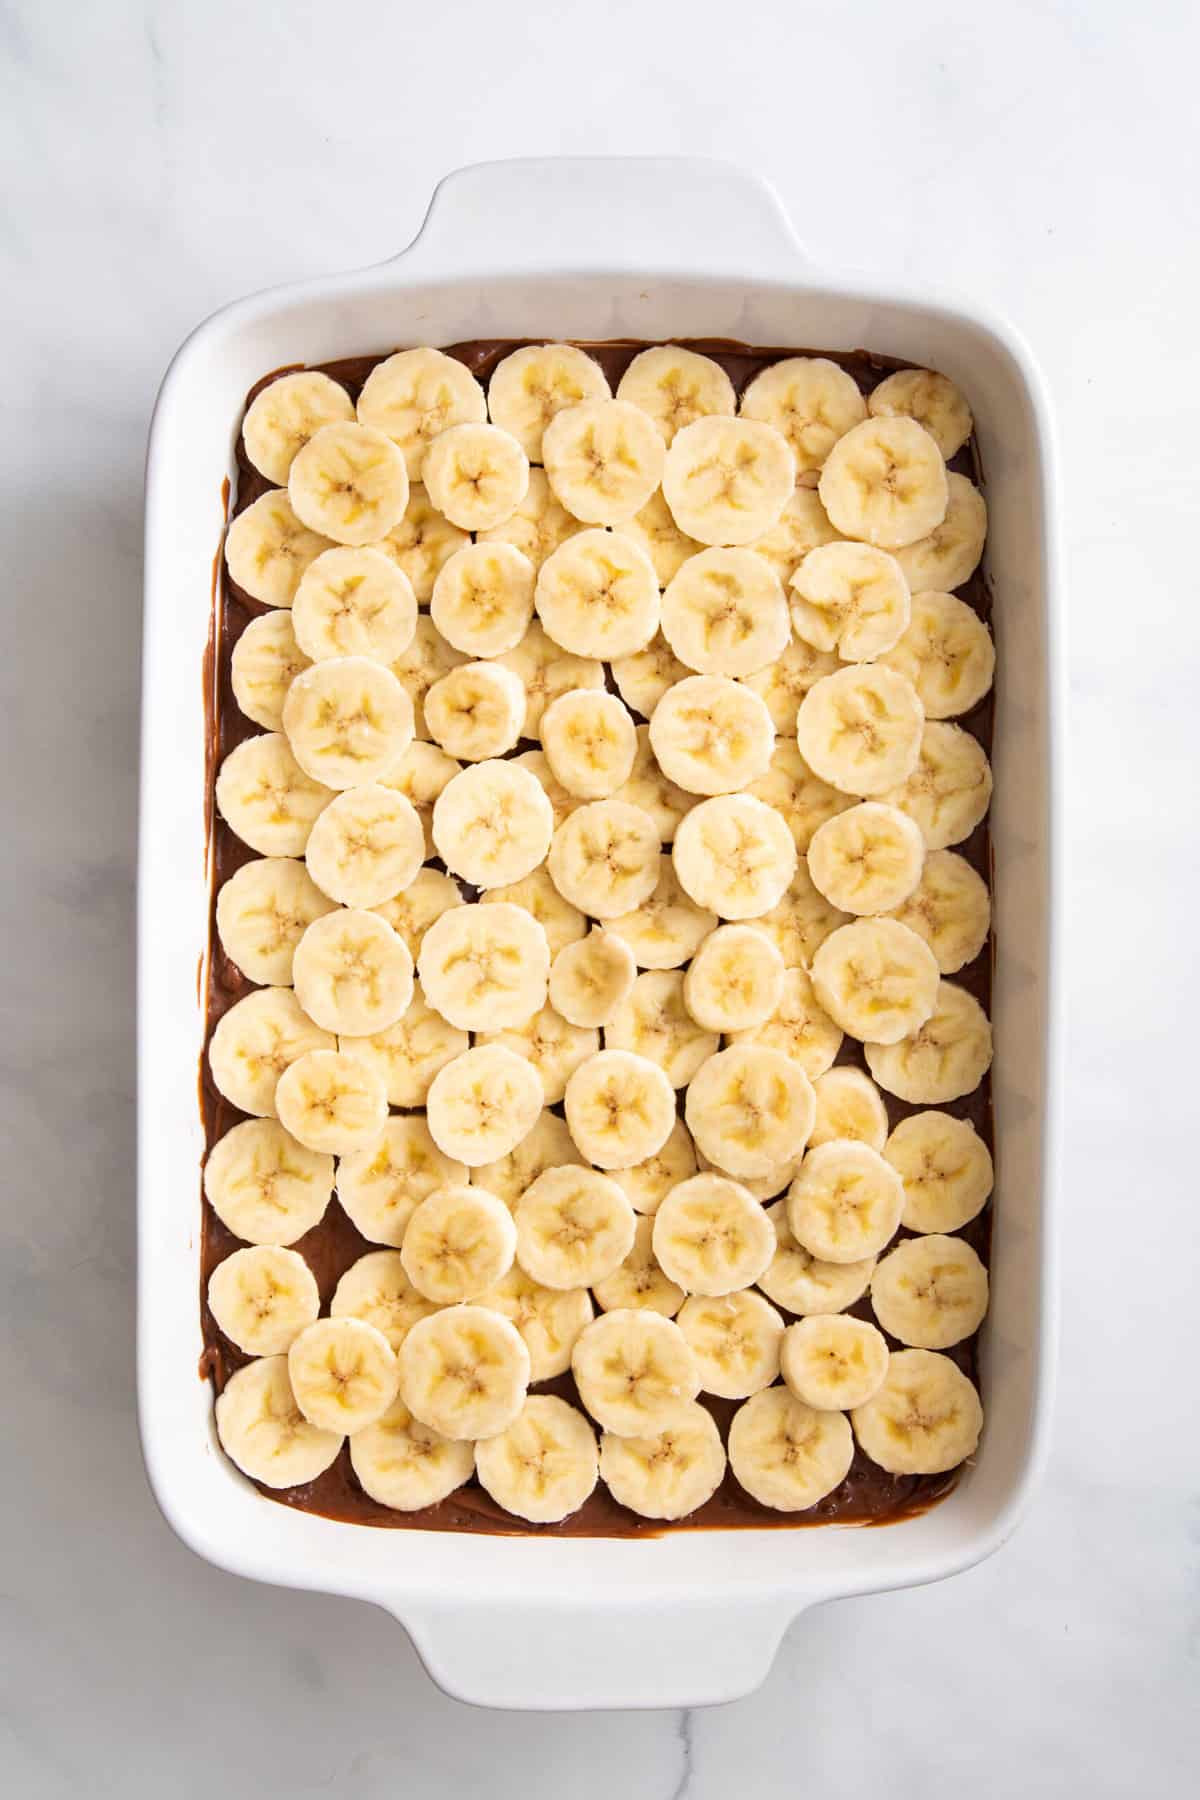 slice bananas layered on top of chocolate pudding mix in a 9x13 baking dish